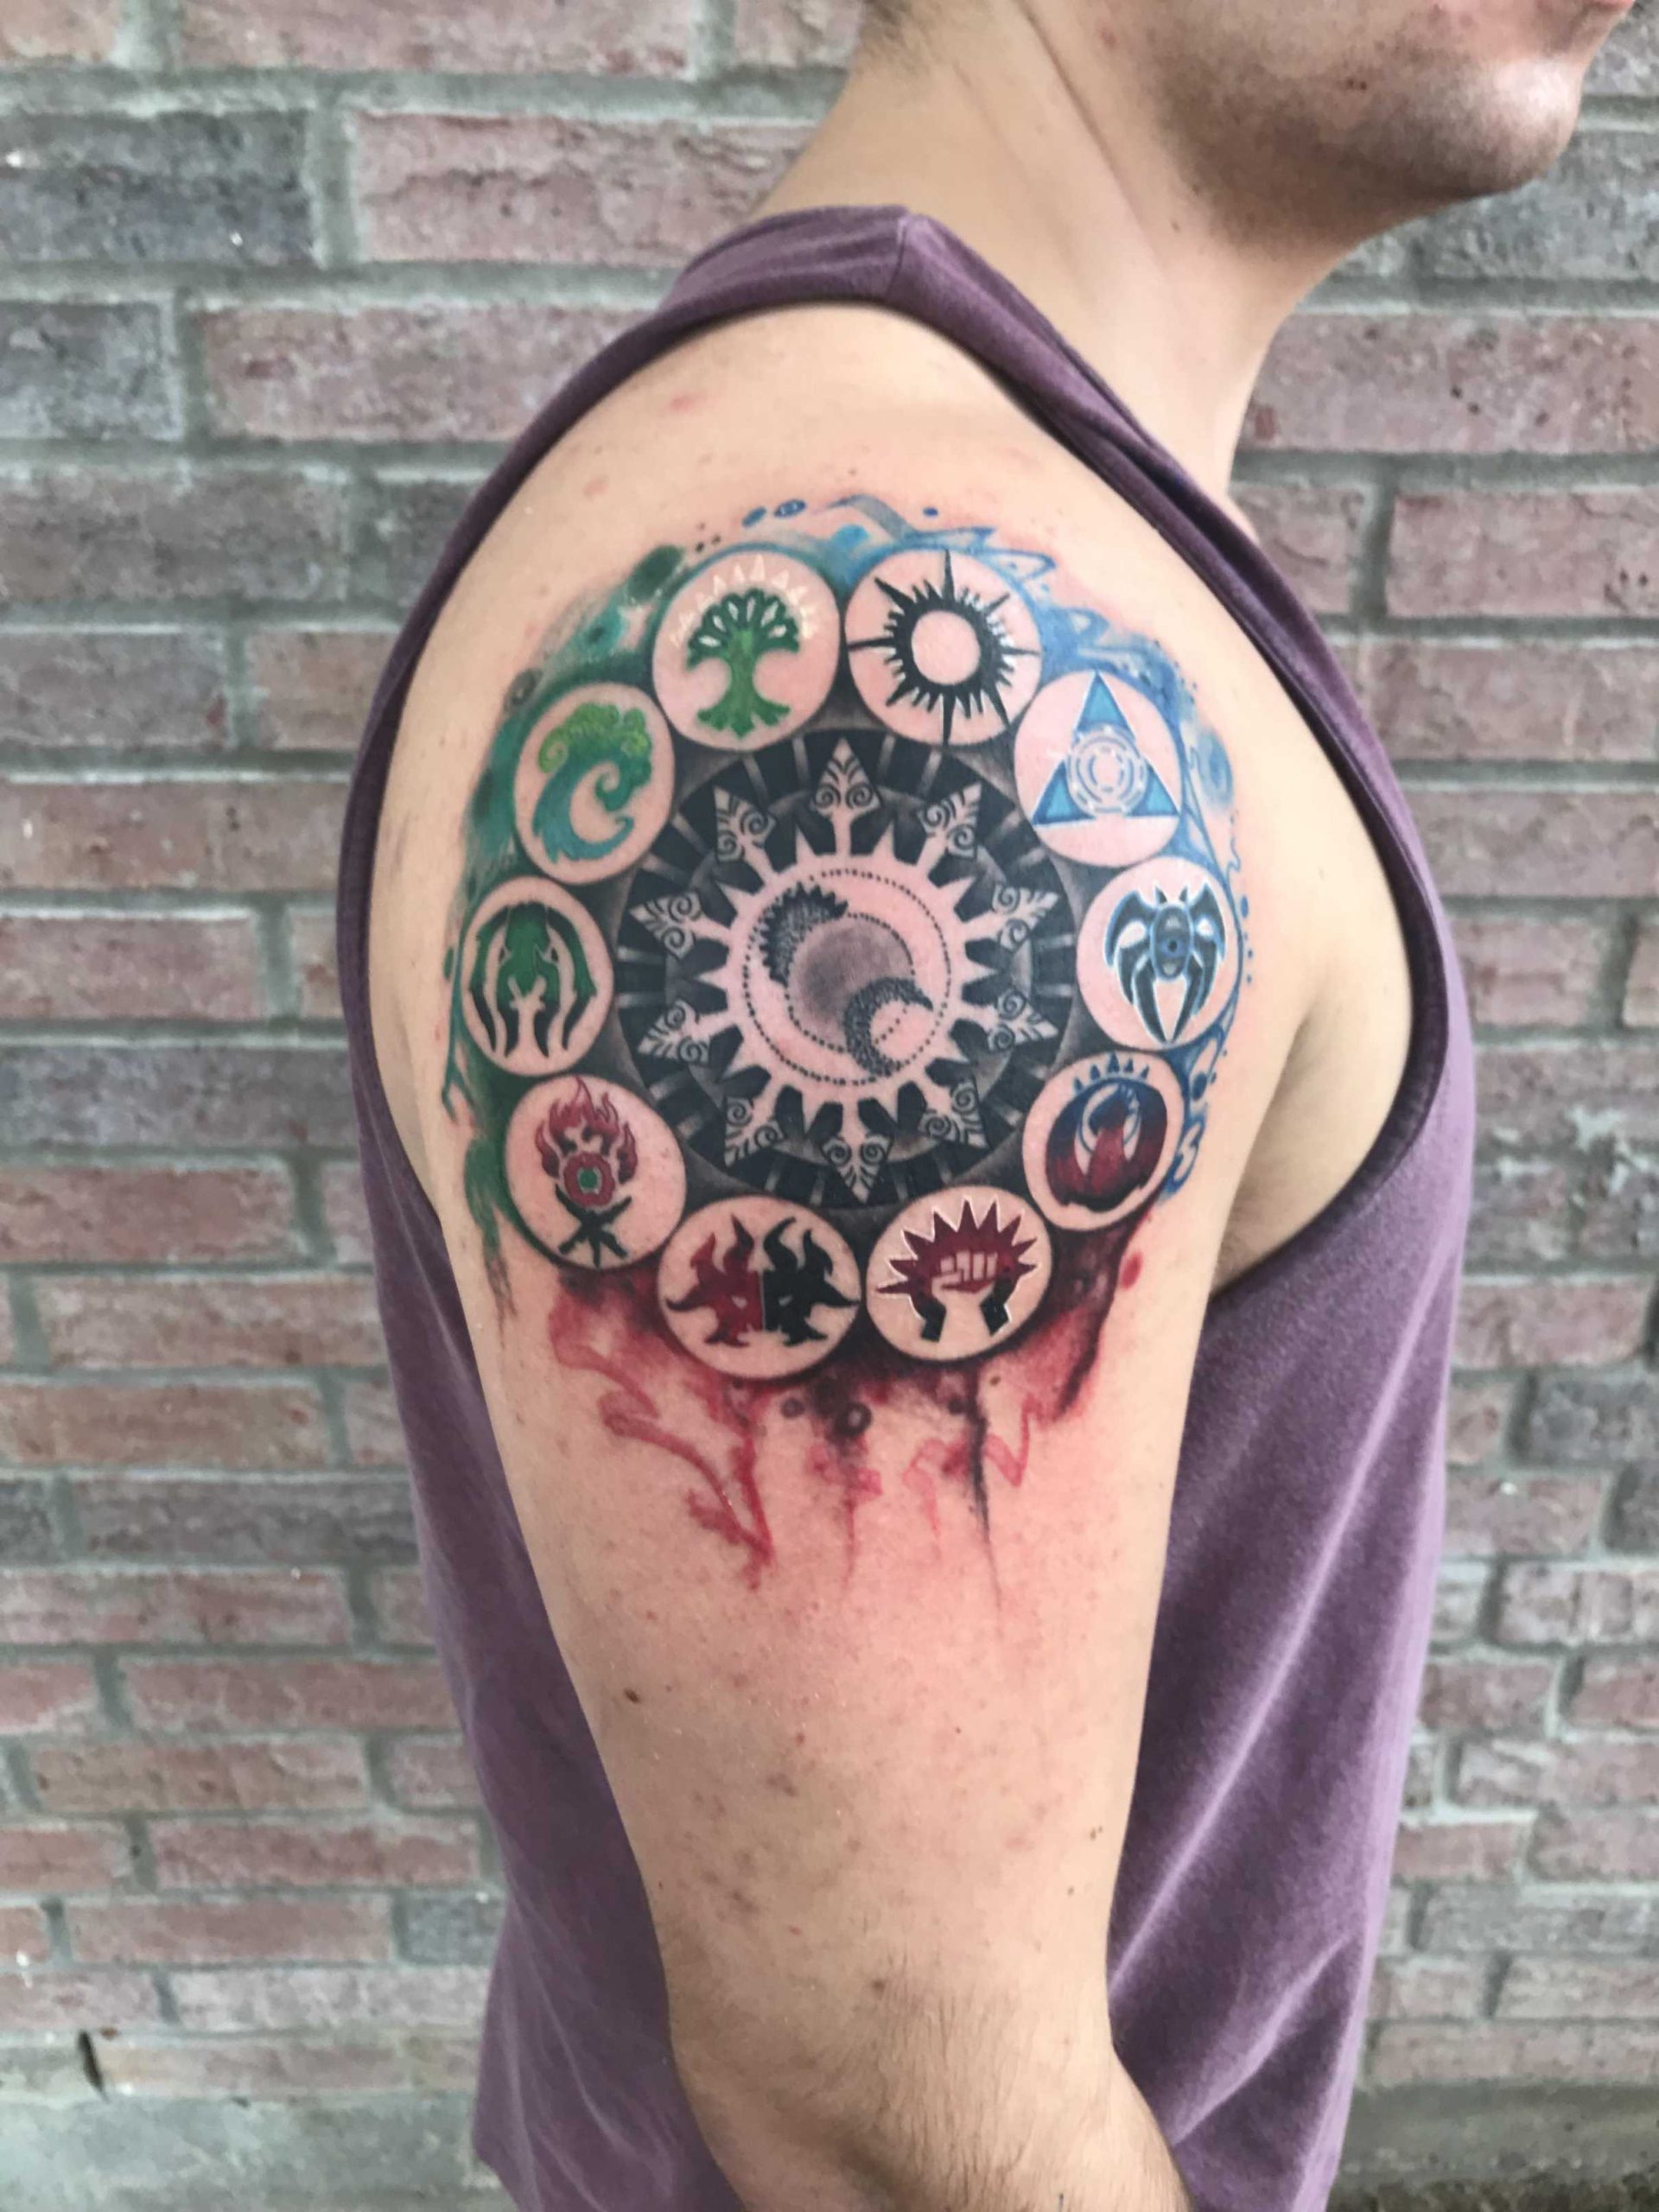 Saw some really cool magic tattoos on here thought I would show